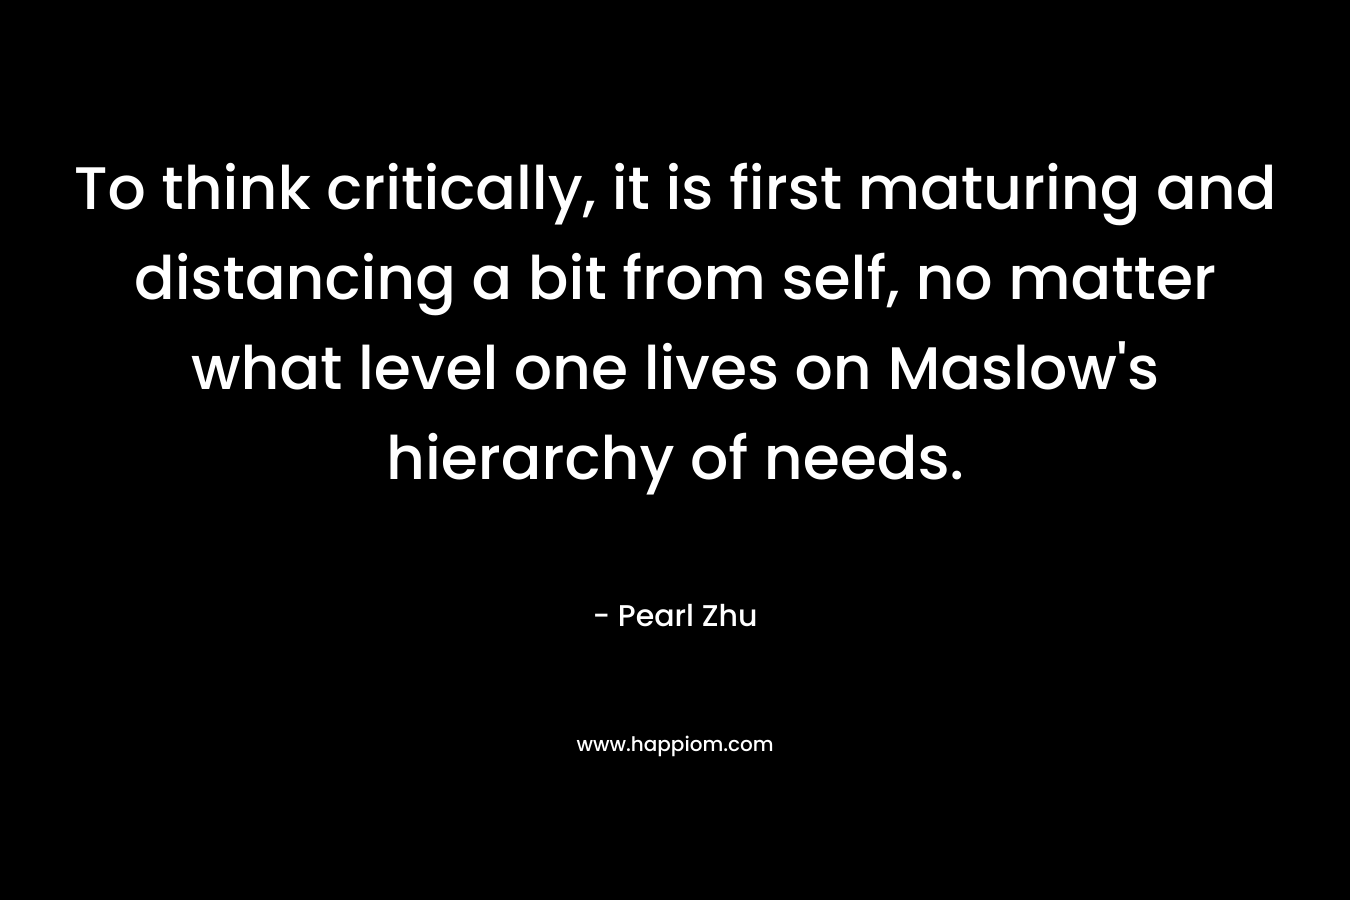 To think critically, it is first maturing and distancing a bit from self, no matter what level one lives on Maslow’s hierarchy of needs. – Pearl Zhu